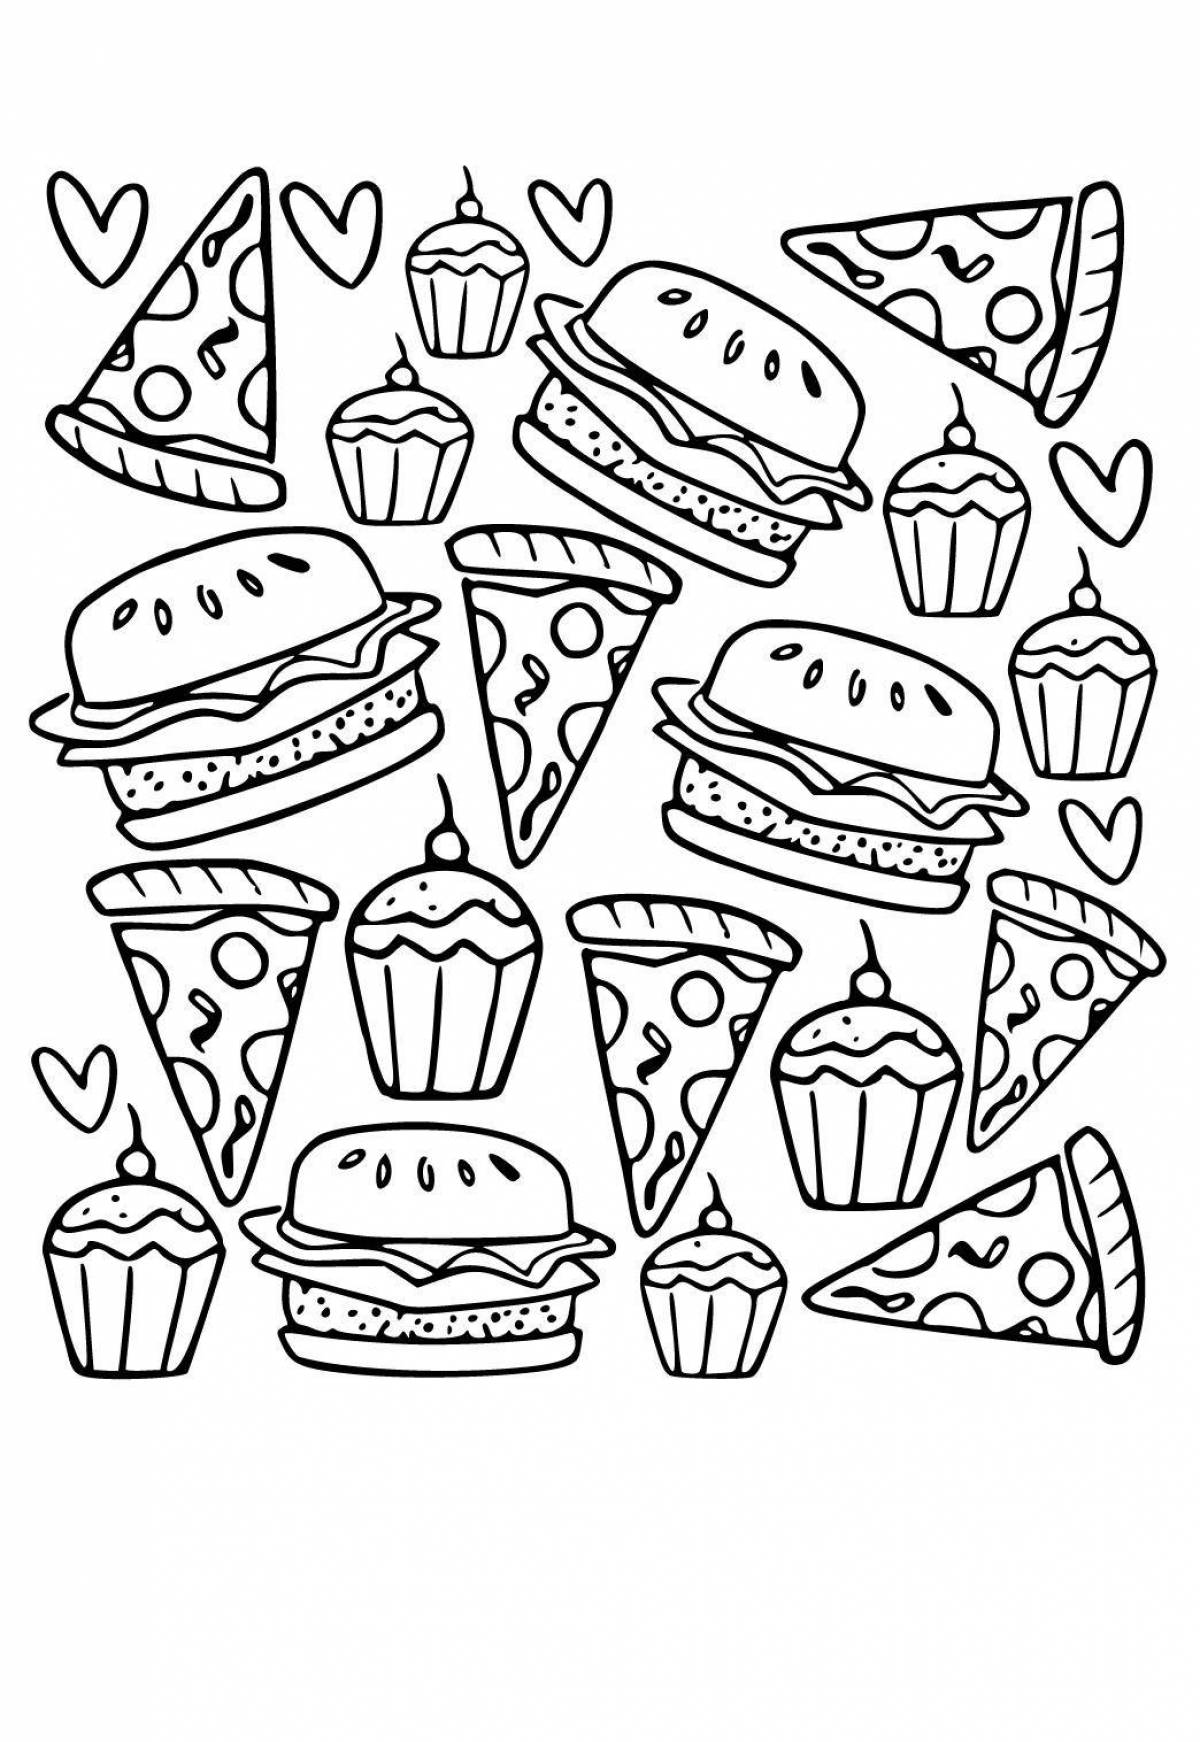 Radiant lp small coloring page